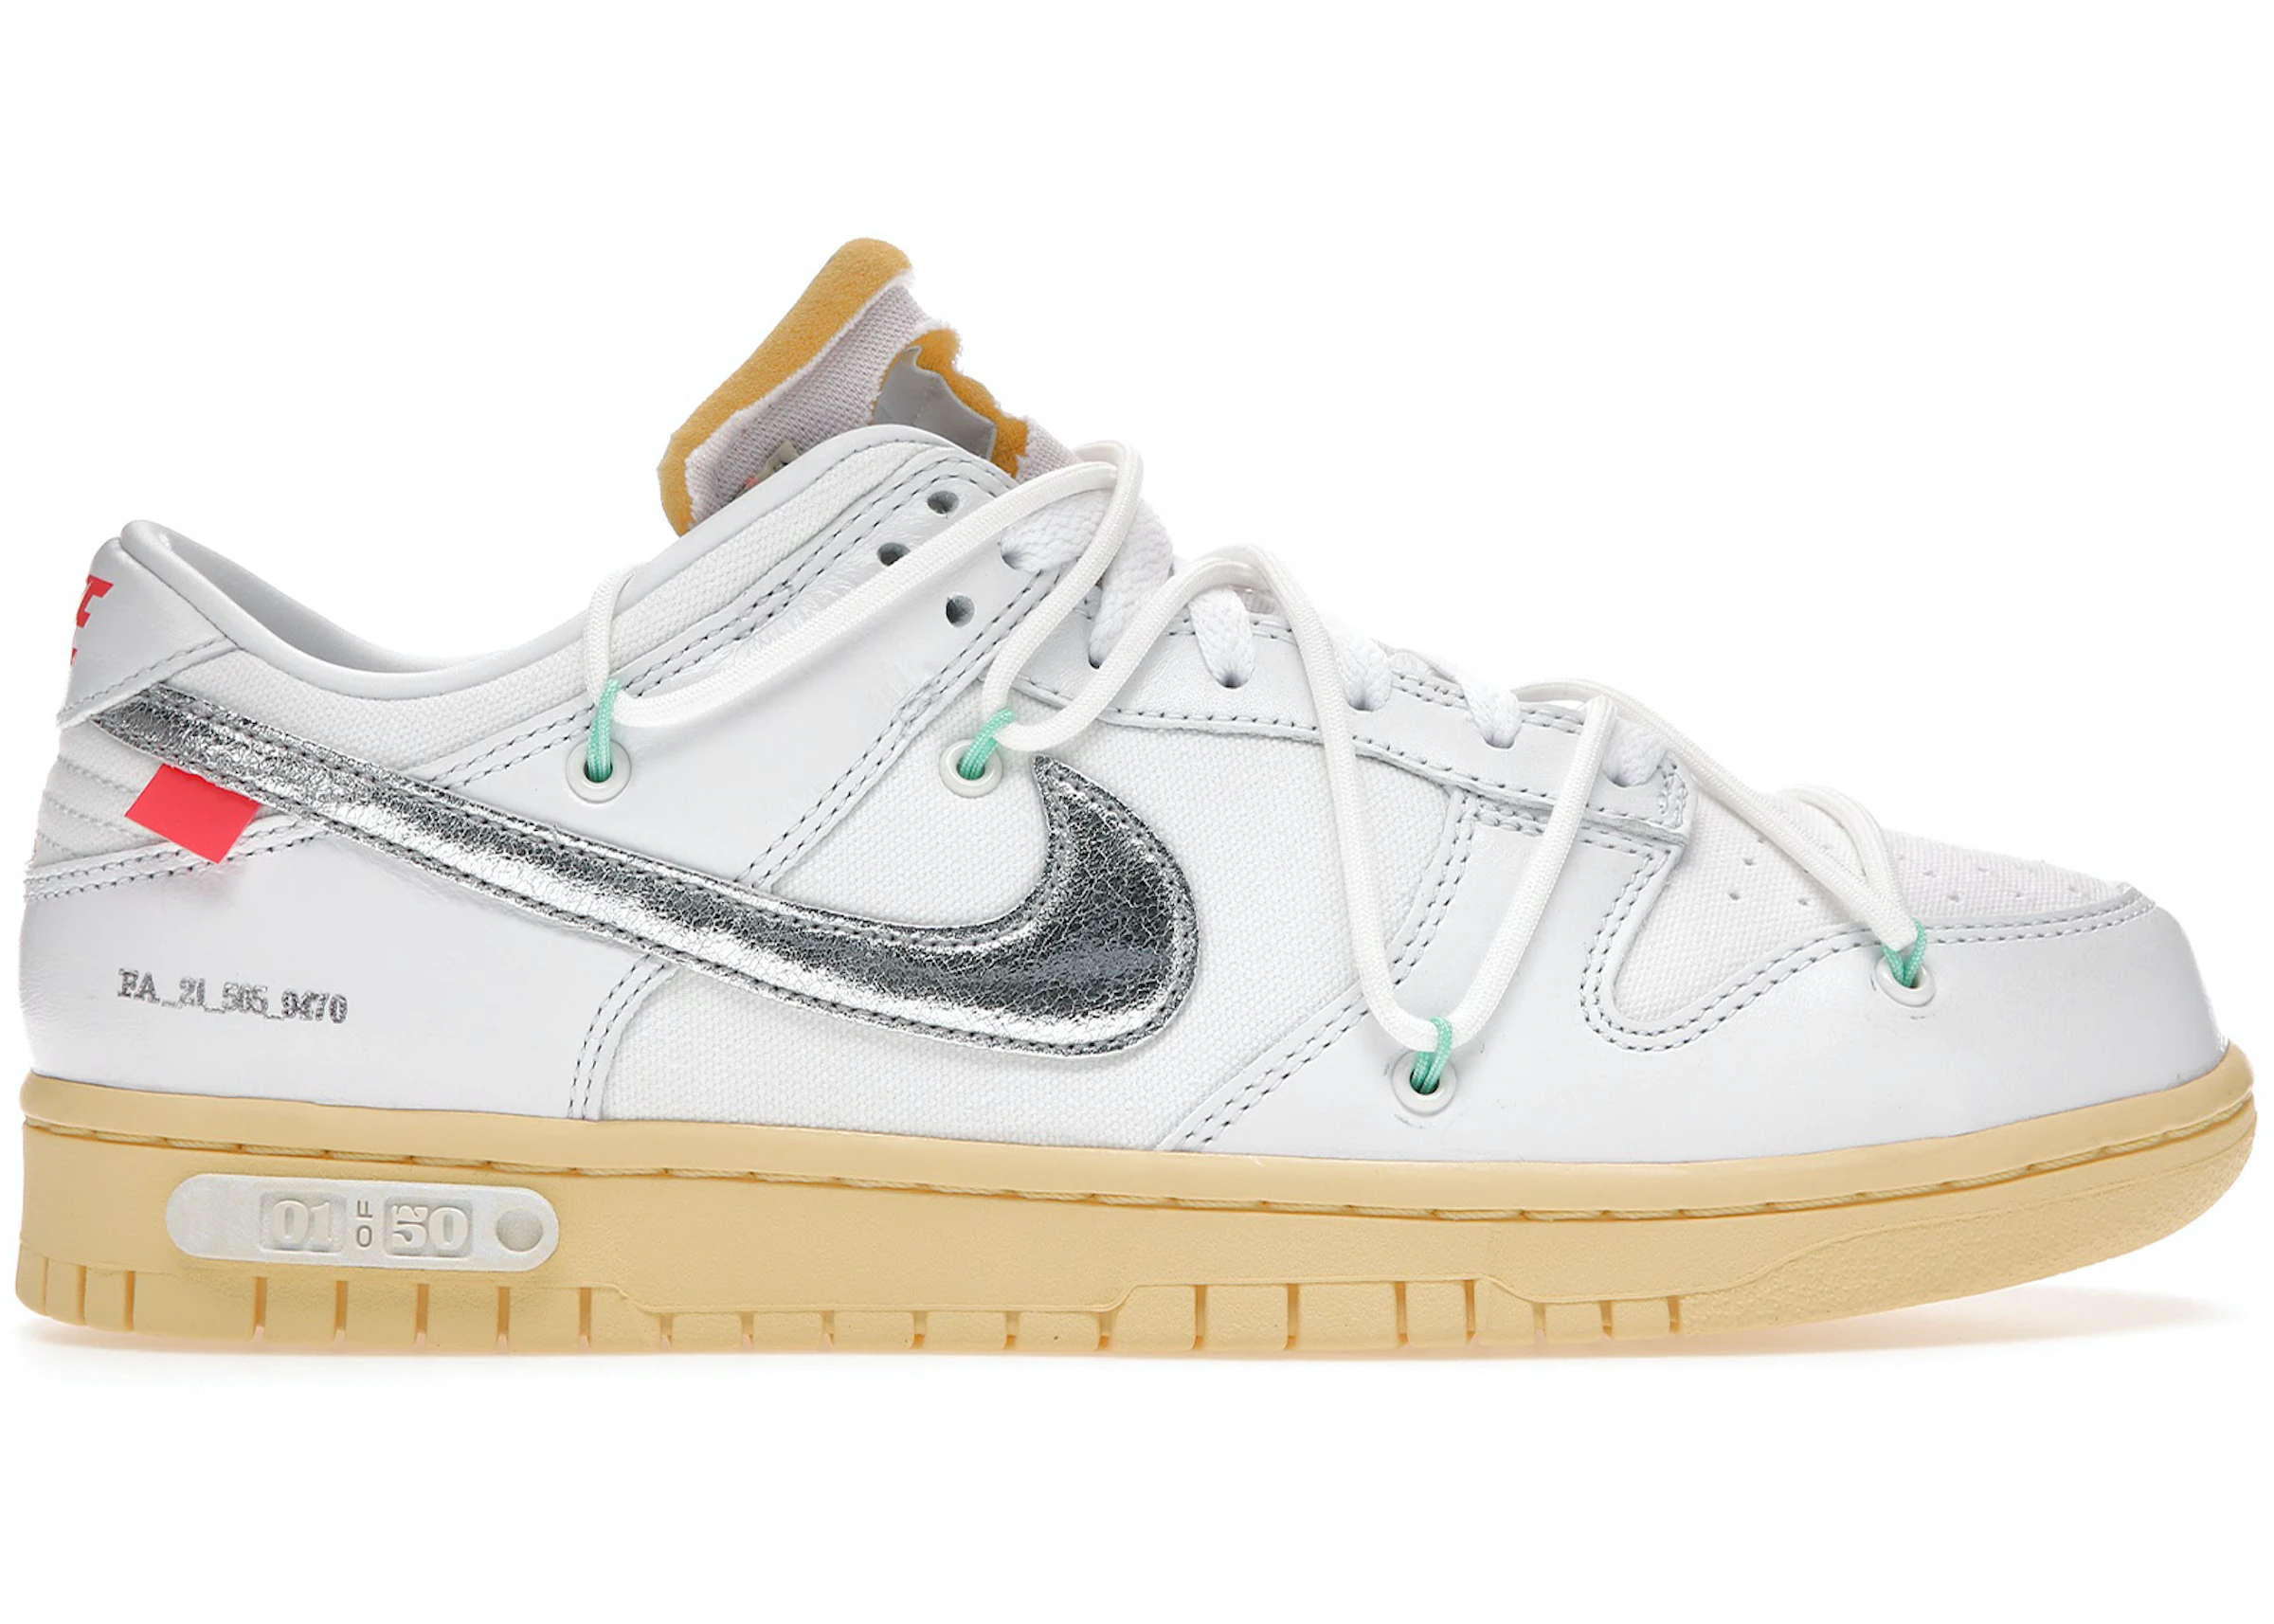 Compra Collections Nike Off-White y sneakers - StockX